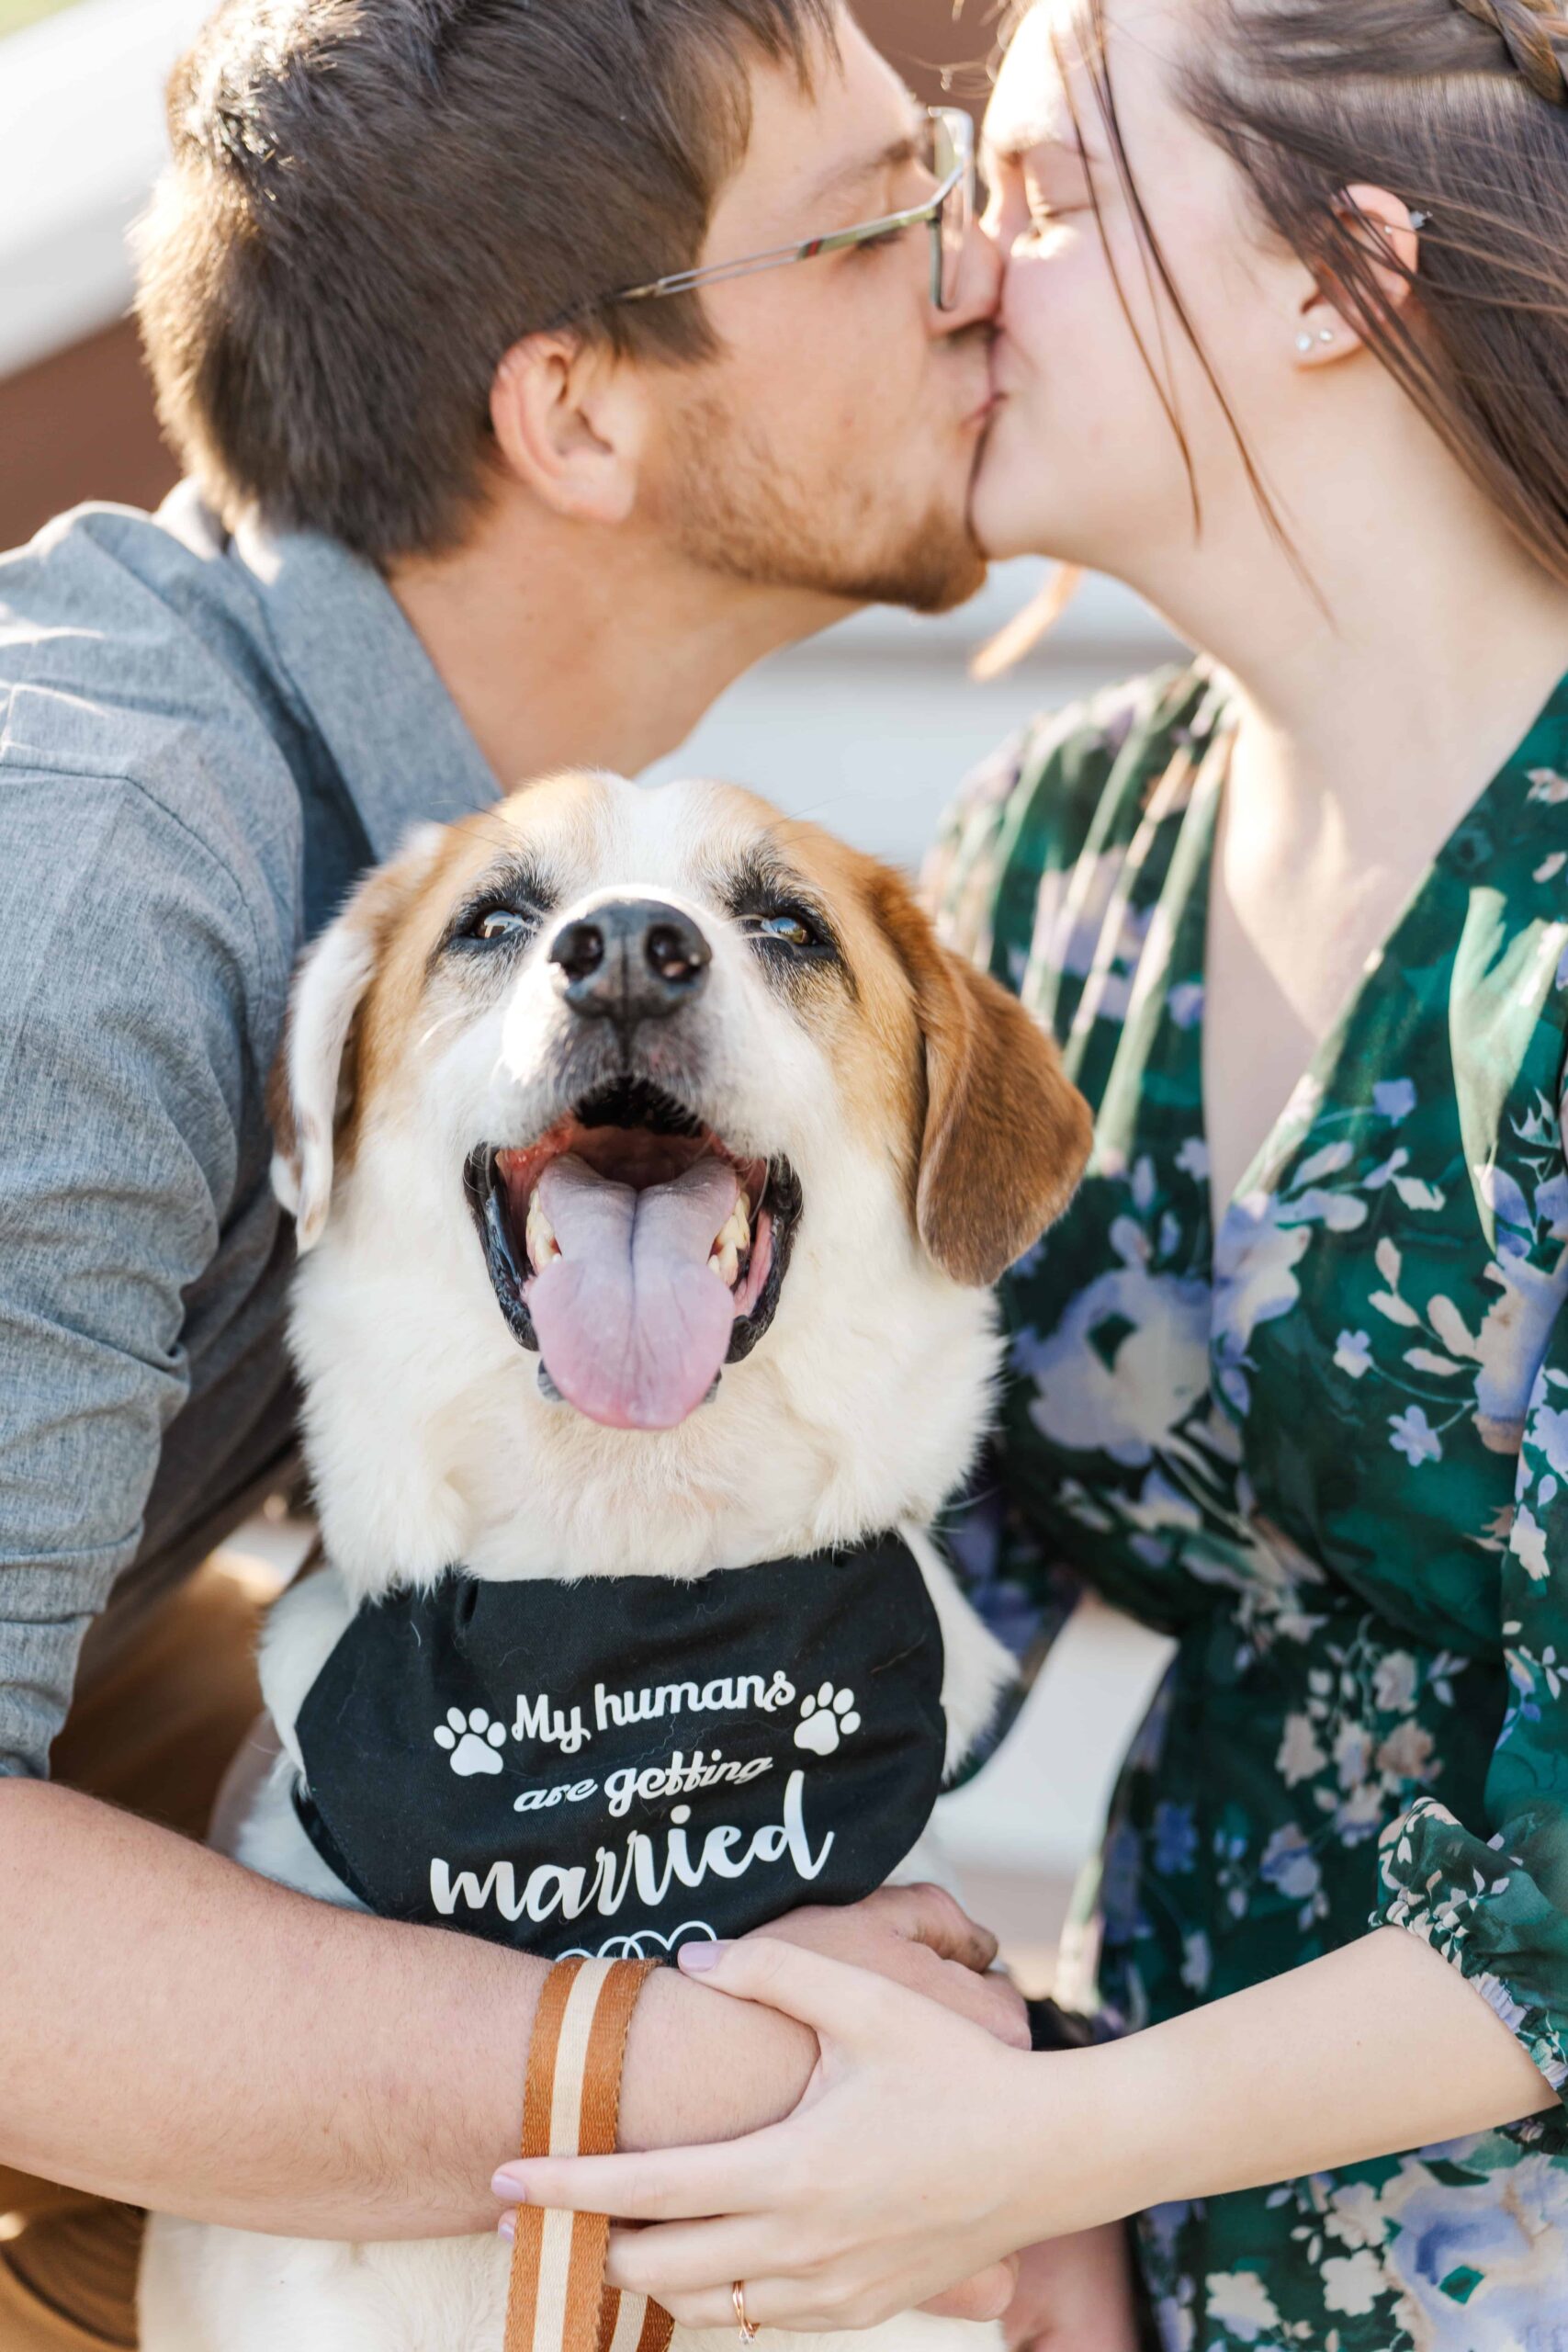 Beau the dog "smiles" happily snuggled up in his owner's arms. His bandana reads "My humans are getting married"